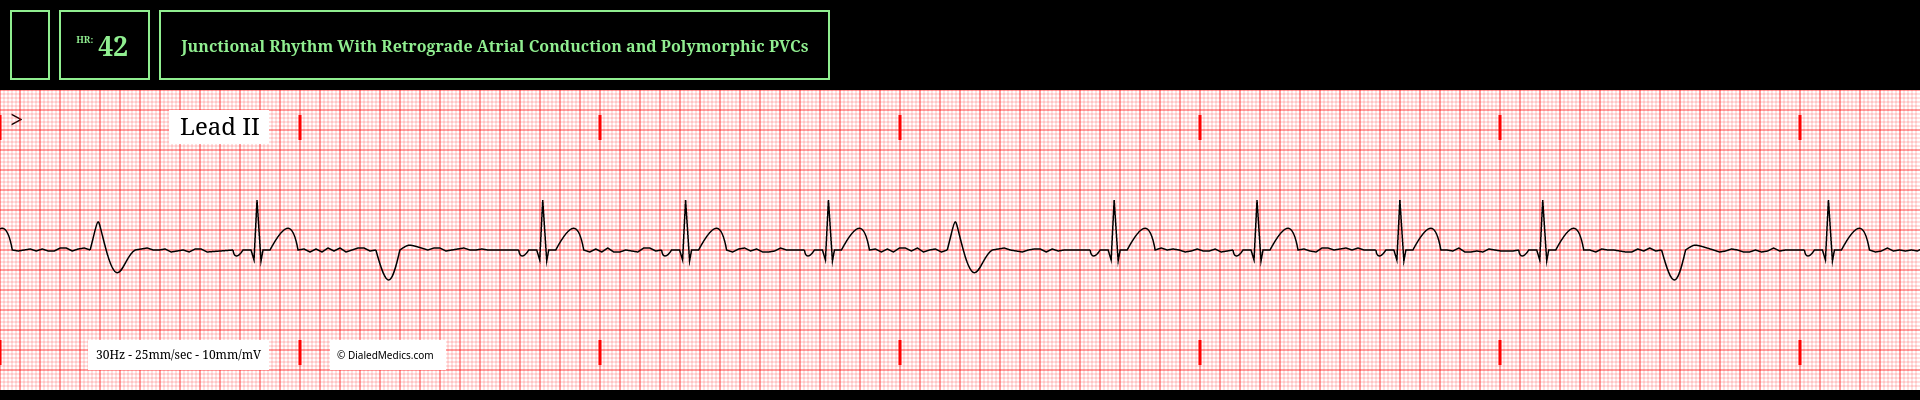 An example of polymorphic ectopy (multifocal PVC's) in a Junctional Rhythm.